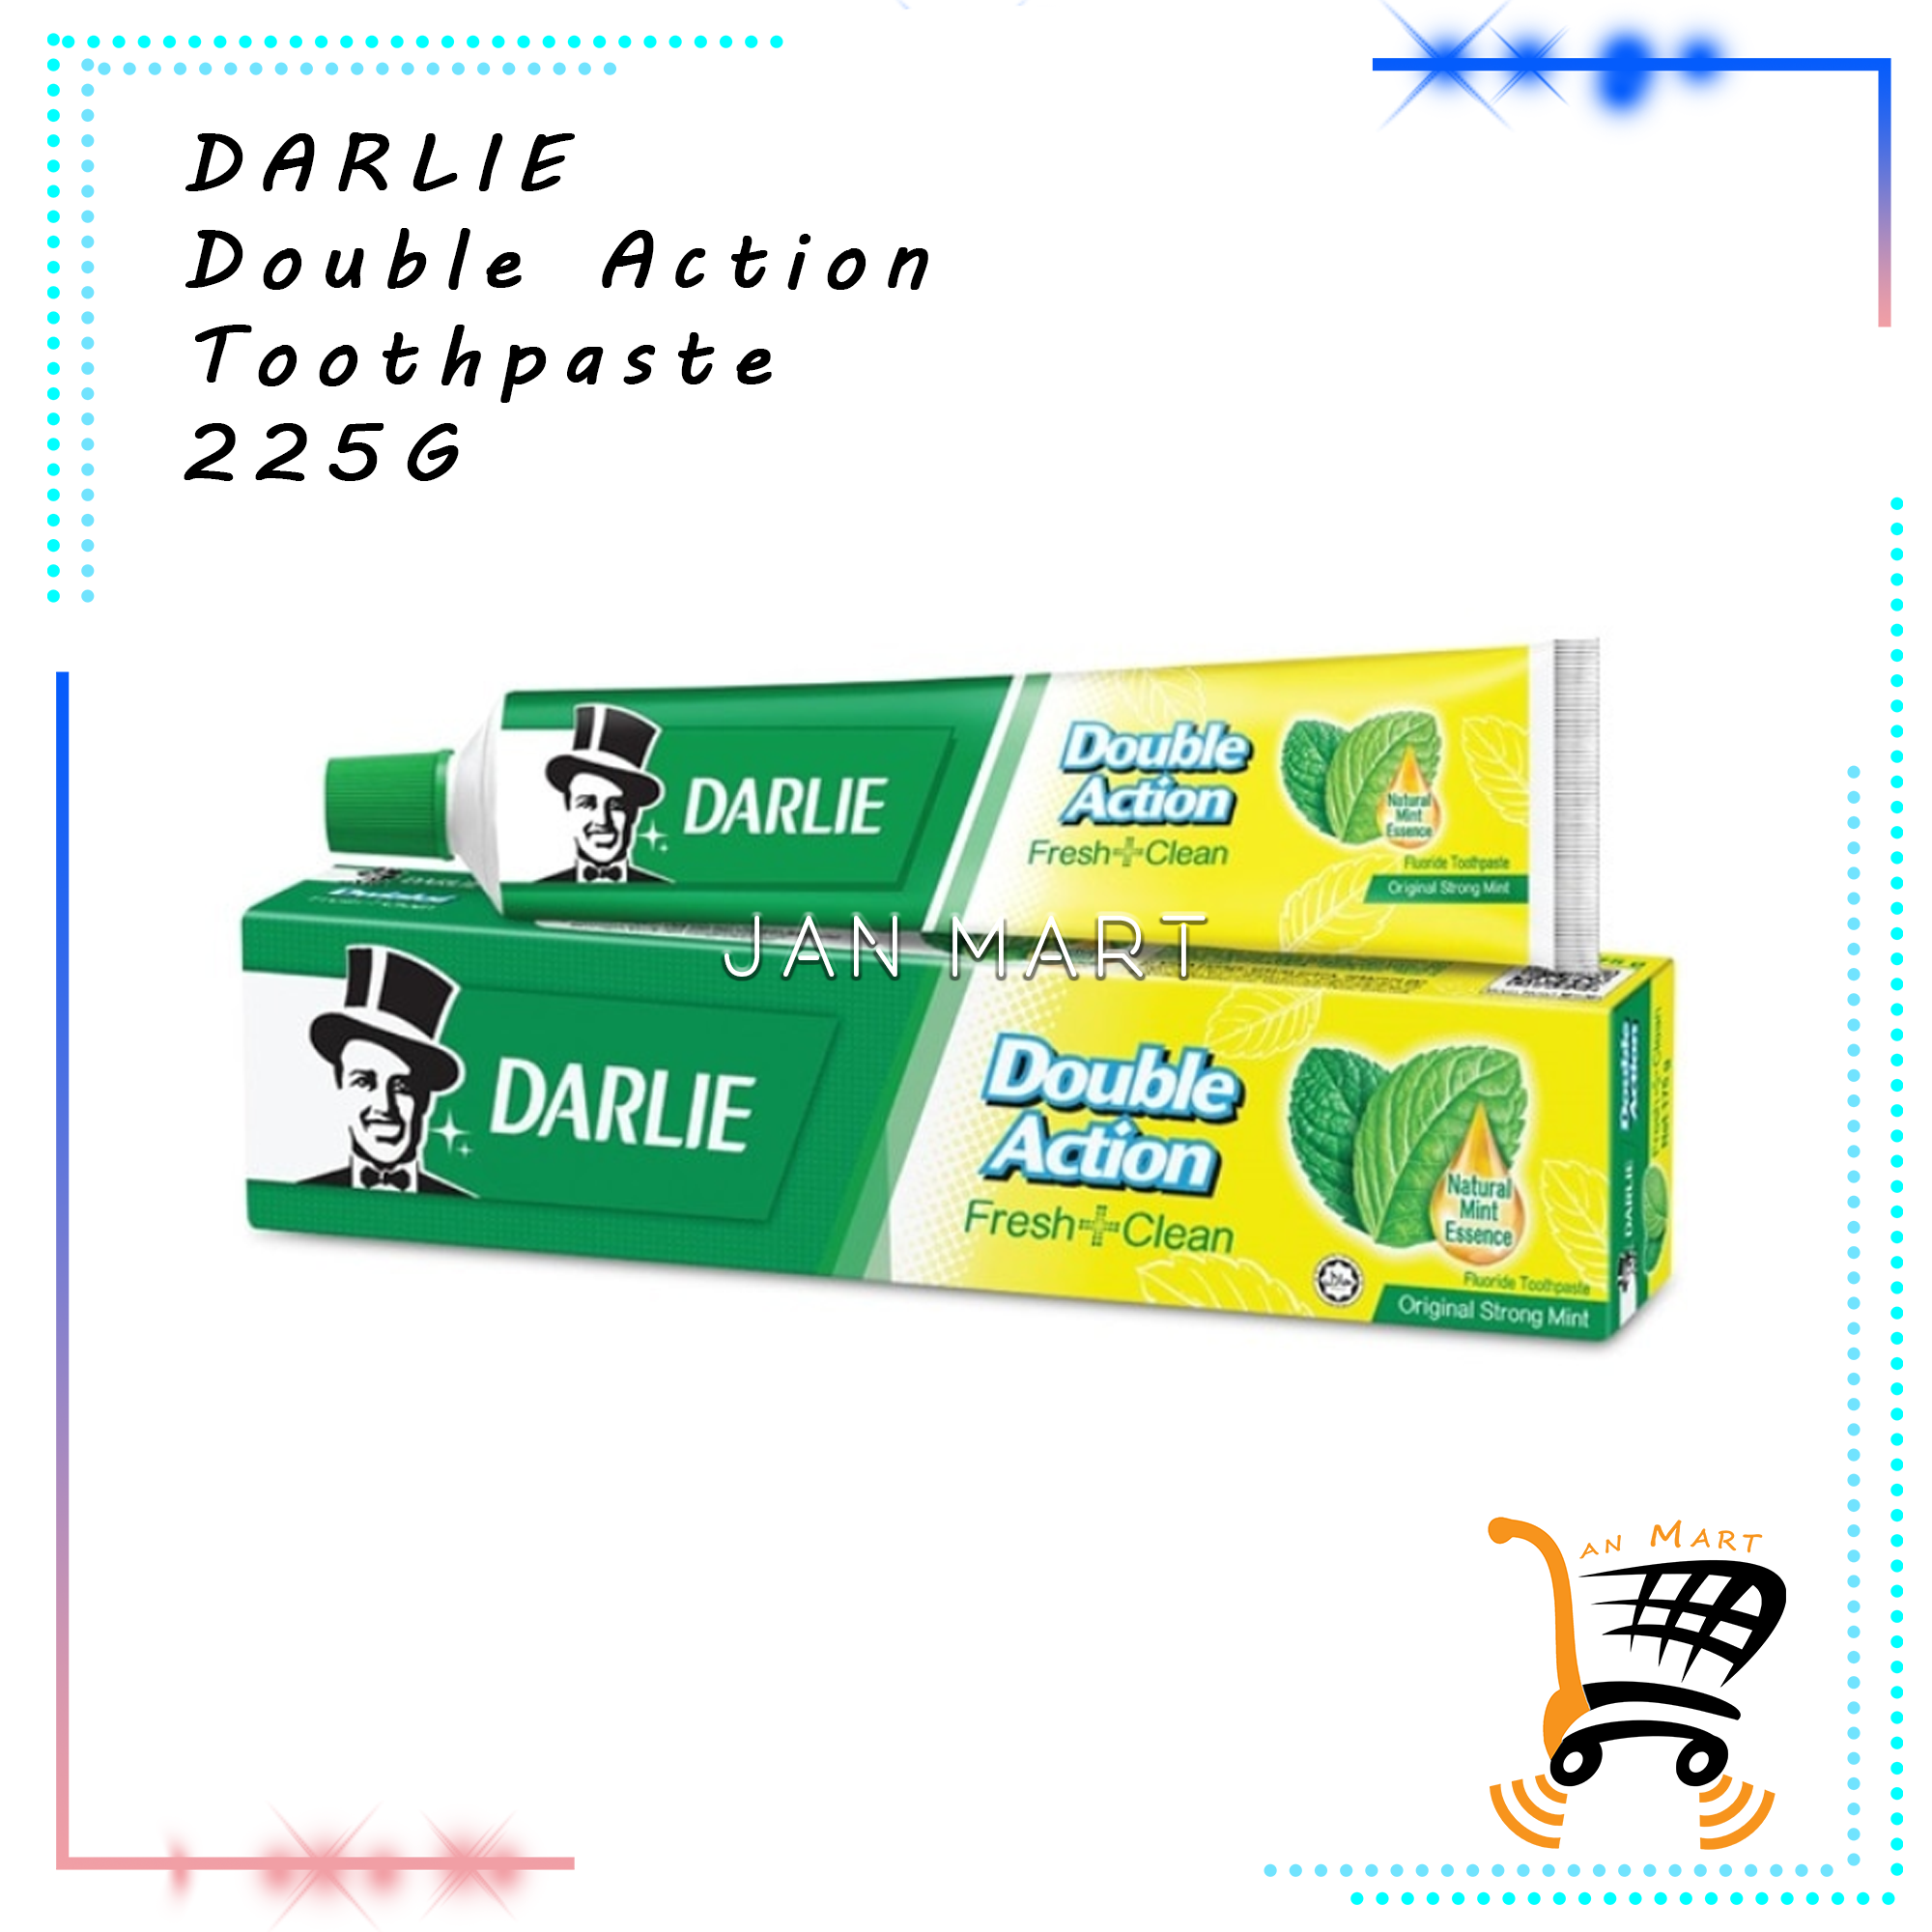 DARLIE Double Action Toothpaste 225G